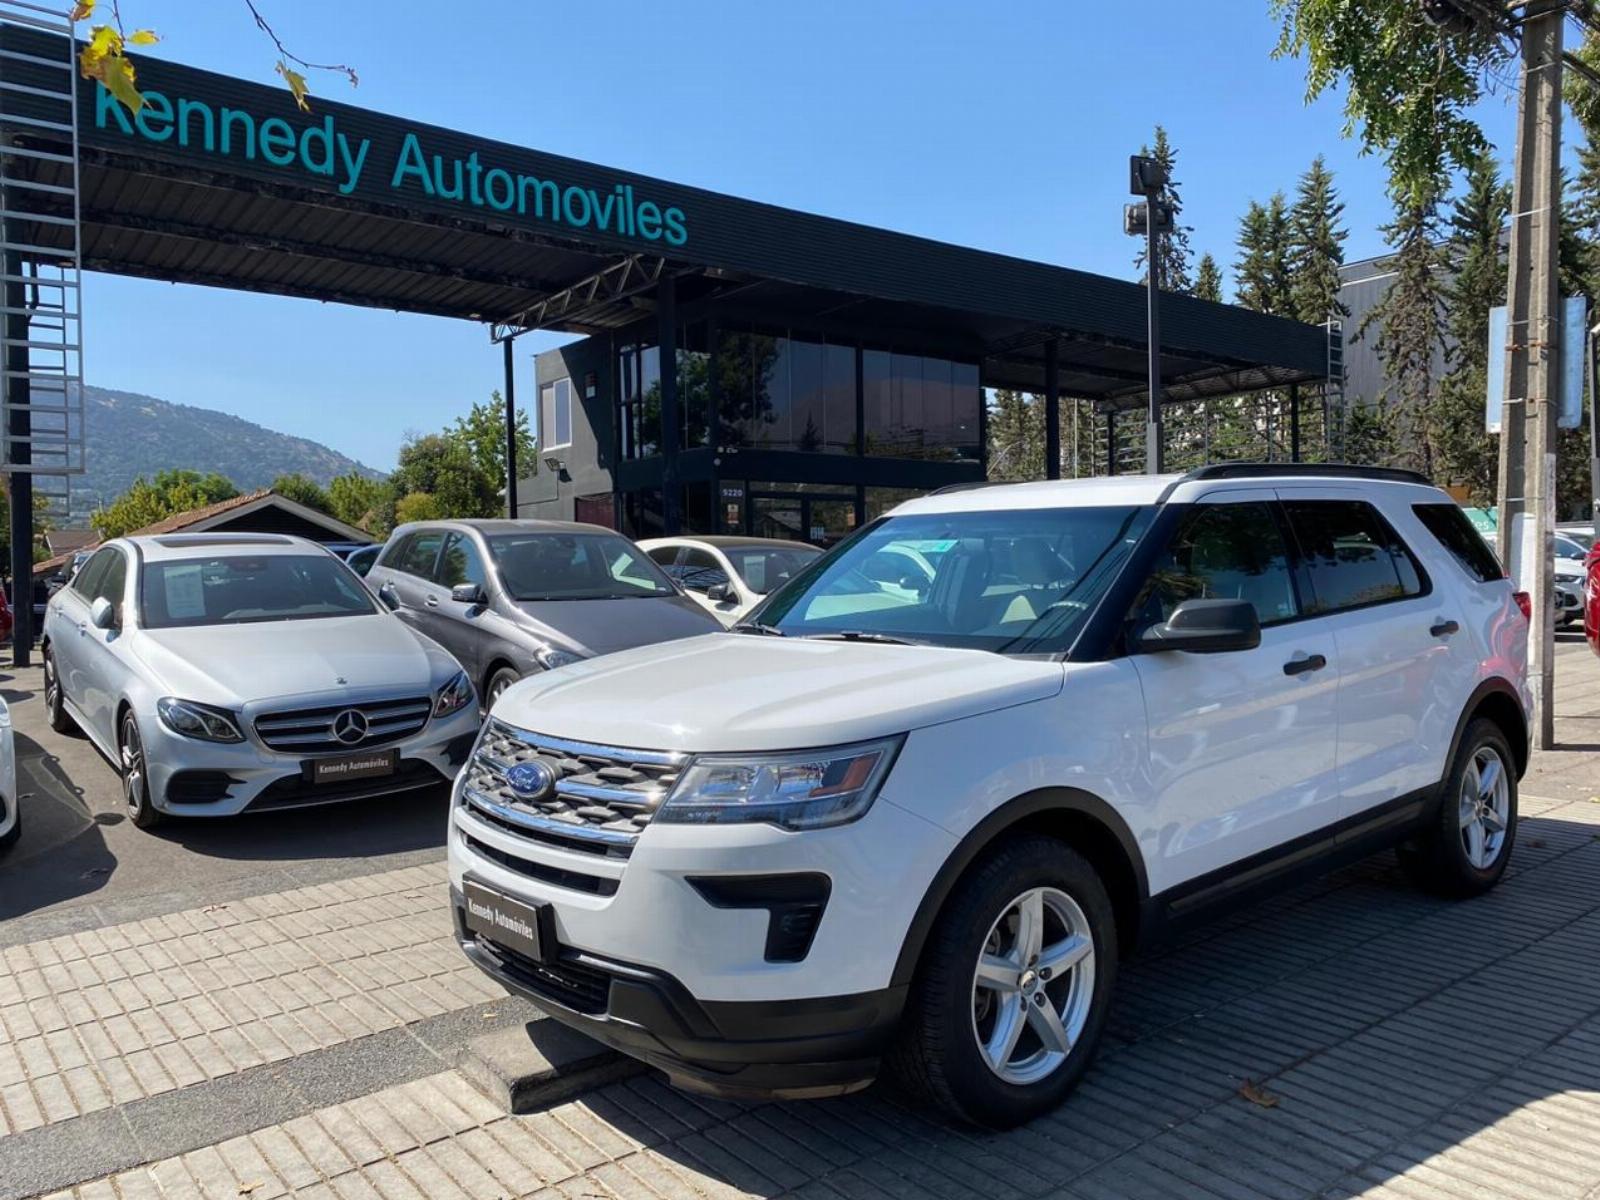 FORD EXPLORER 2.3 Ecoboost Auto 2019 Impecable - KENNEDY AUTOMOVILES